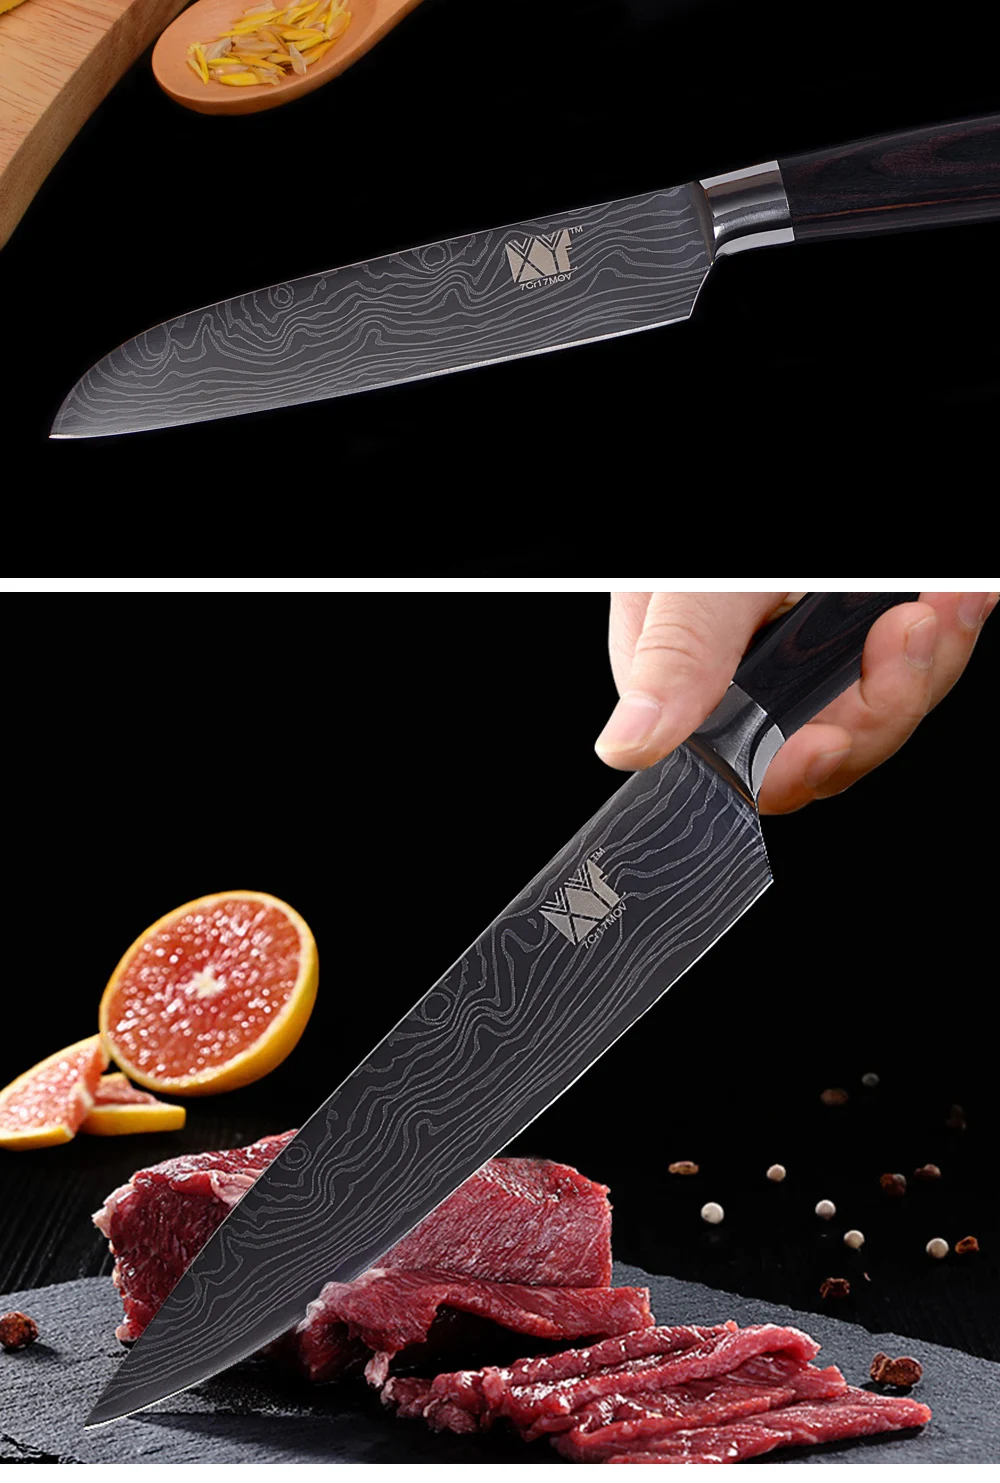 XYj 8 inch Stainless Steel Chef Knife Damascus Pattern Blade Color Wood Handle Kitchen Cooking Knives Meat Fish Tools Accessory